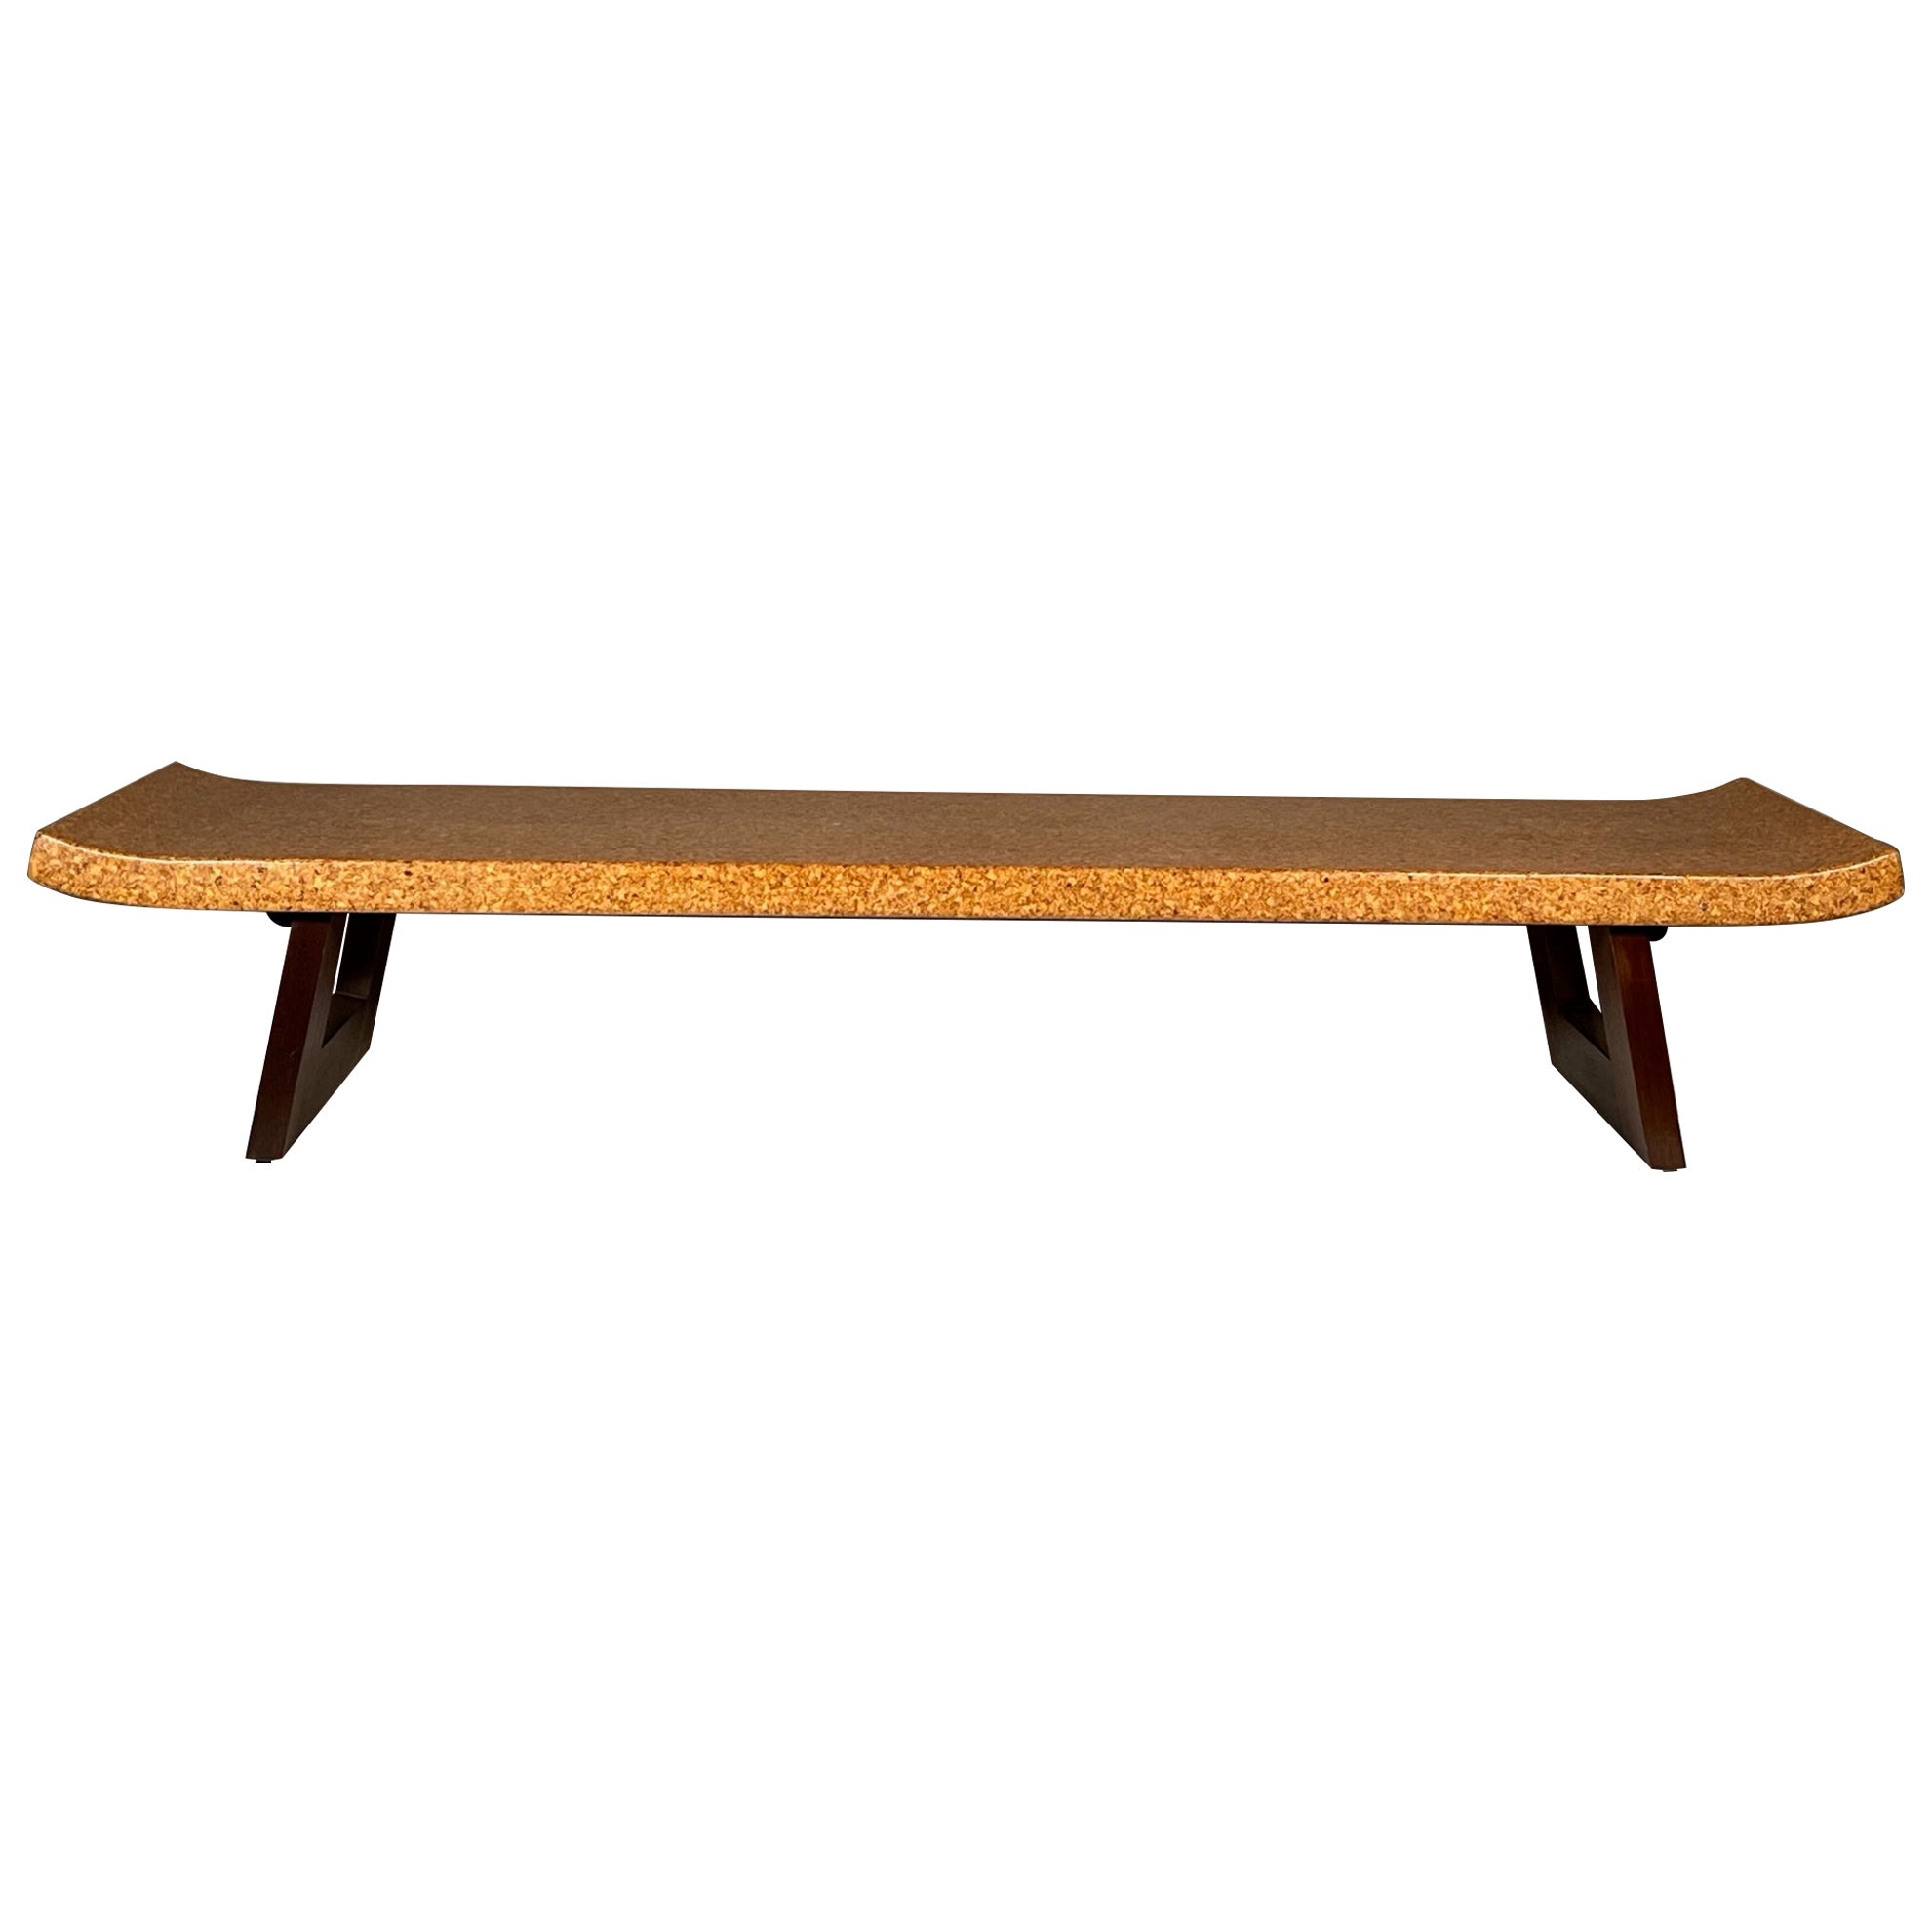 Classic Paul Frankl Bench with Cork Top and Raised Ends